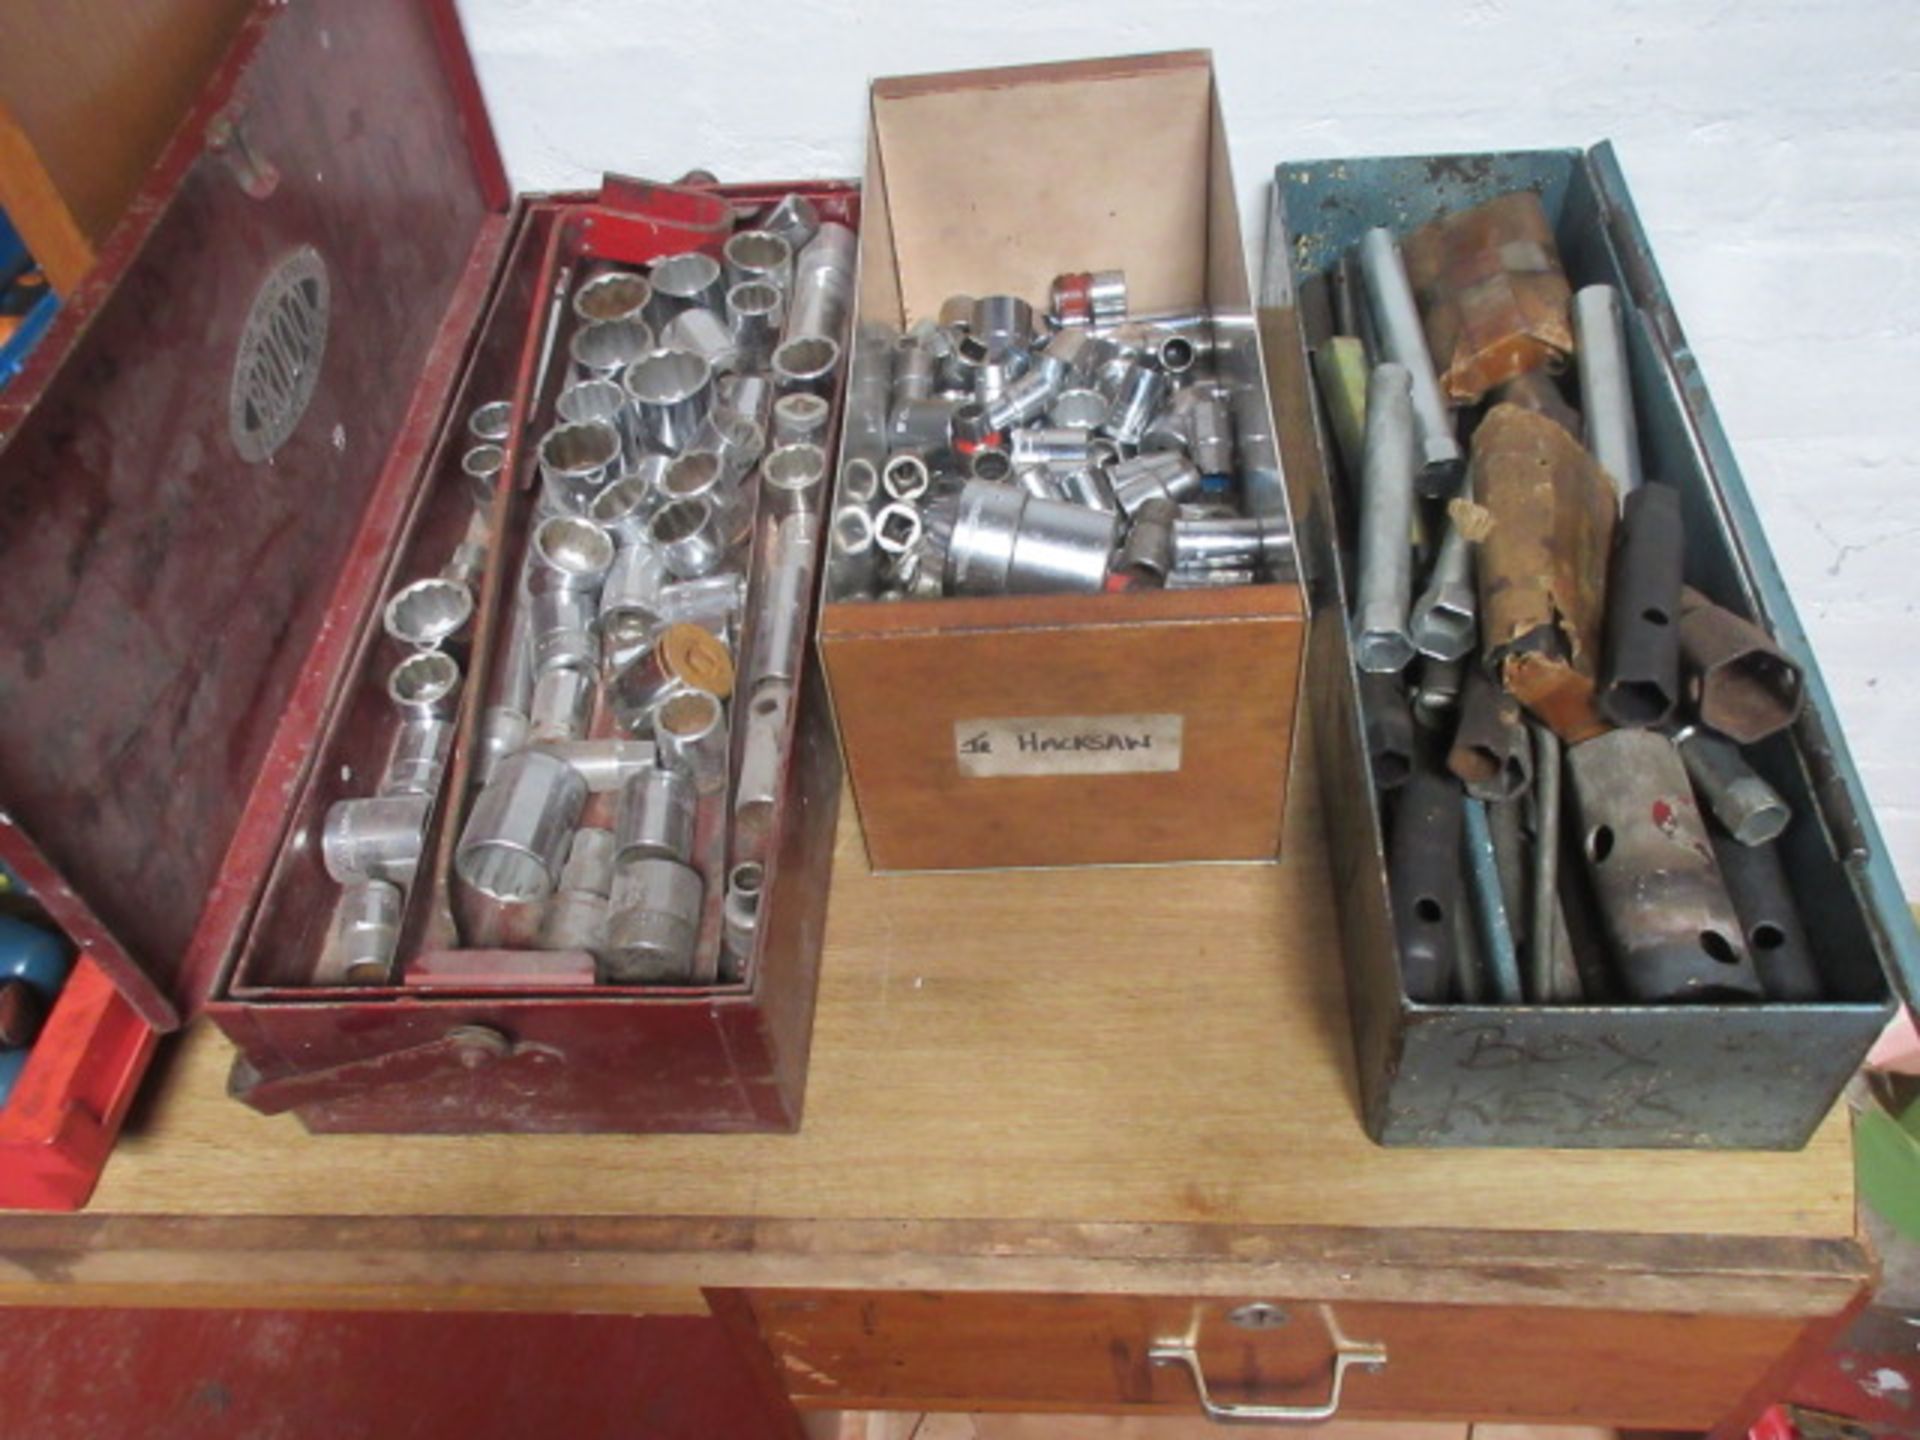 A Qty of assorted sockets & box spanners as lotted. Holehouse Road. Garage workshop. - Image 3 of 3